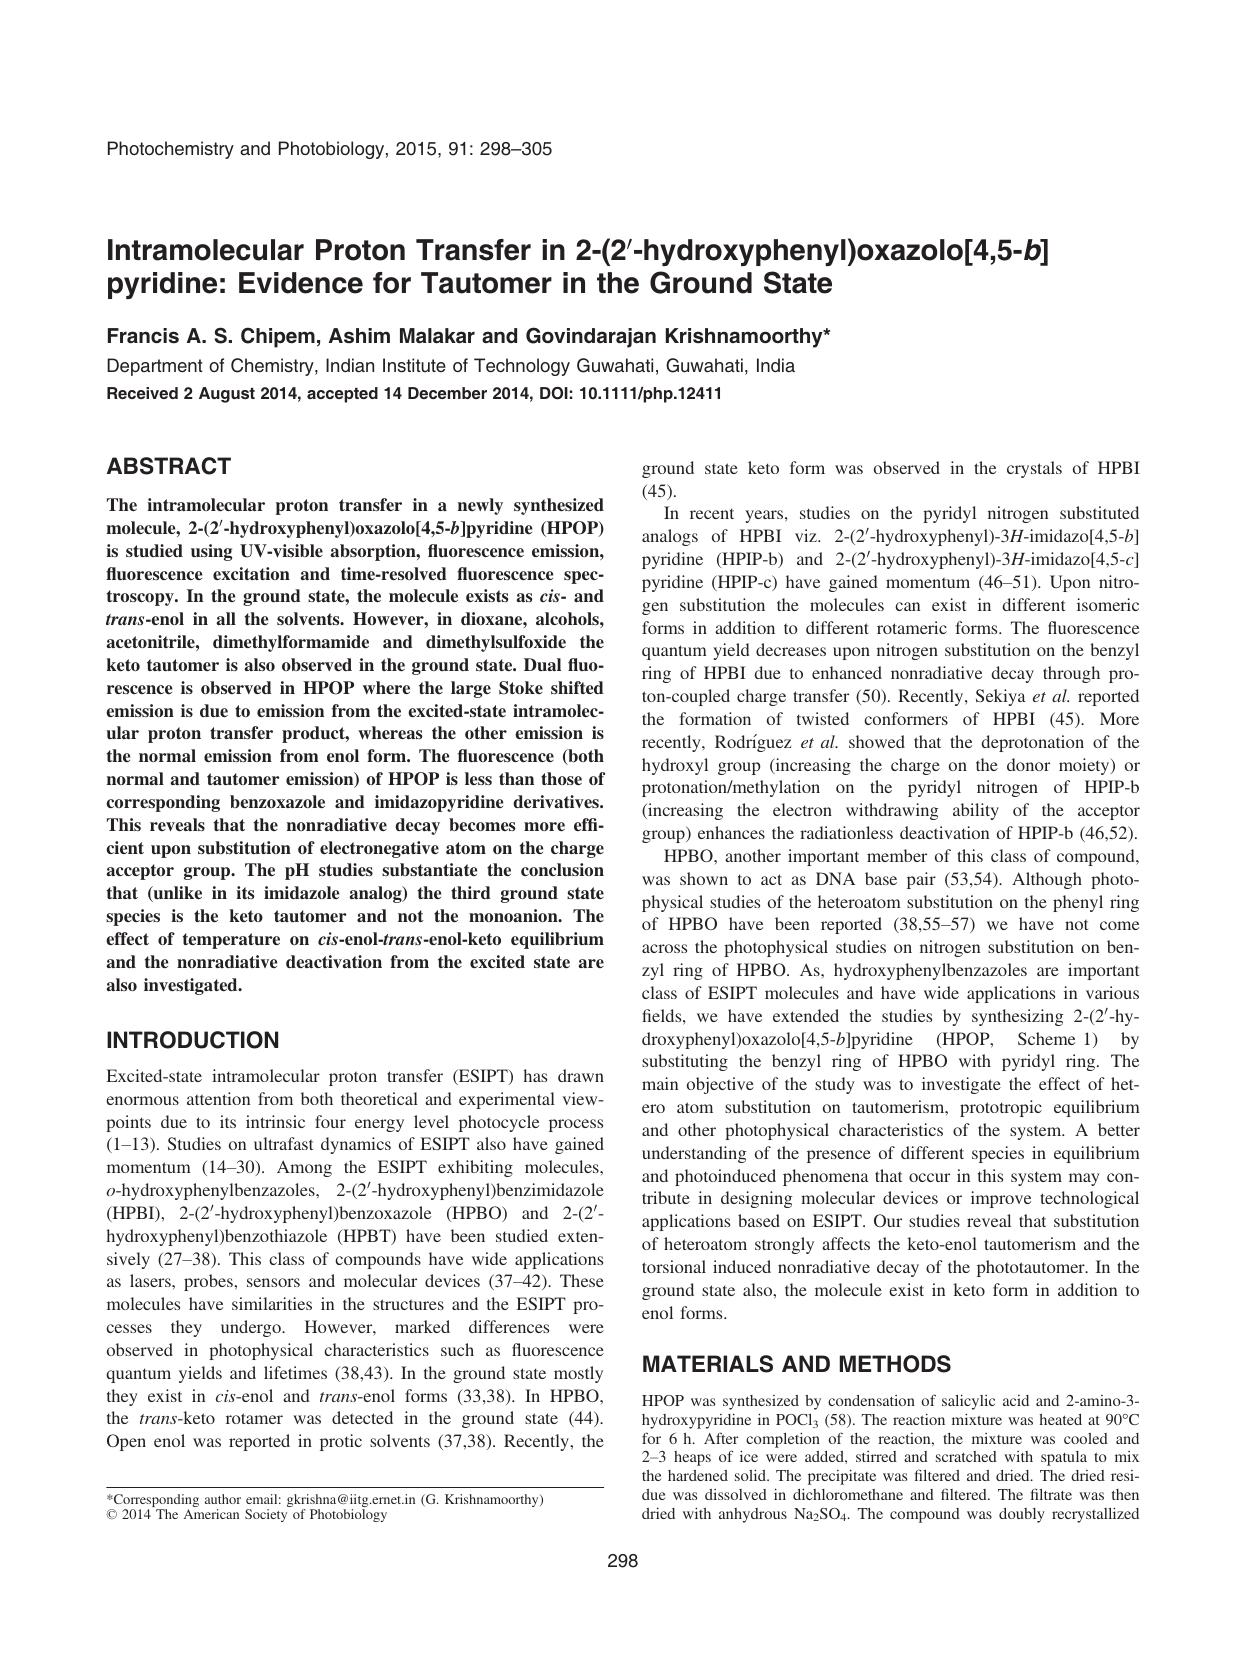 Intramolecular Proton Transfer in 2&#x2010;(2&#x2032;&#x2010;hydroxyphenyl)oxazolo[4,5&#x2010;b]pyridine: Evidence for Tautomer in the Ground State by Unknown